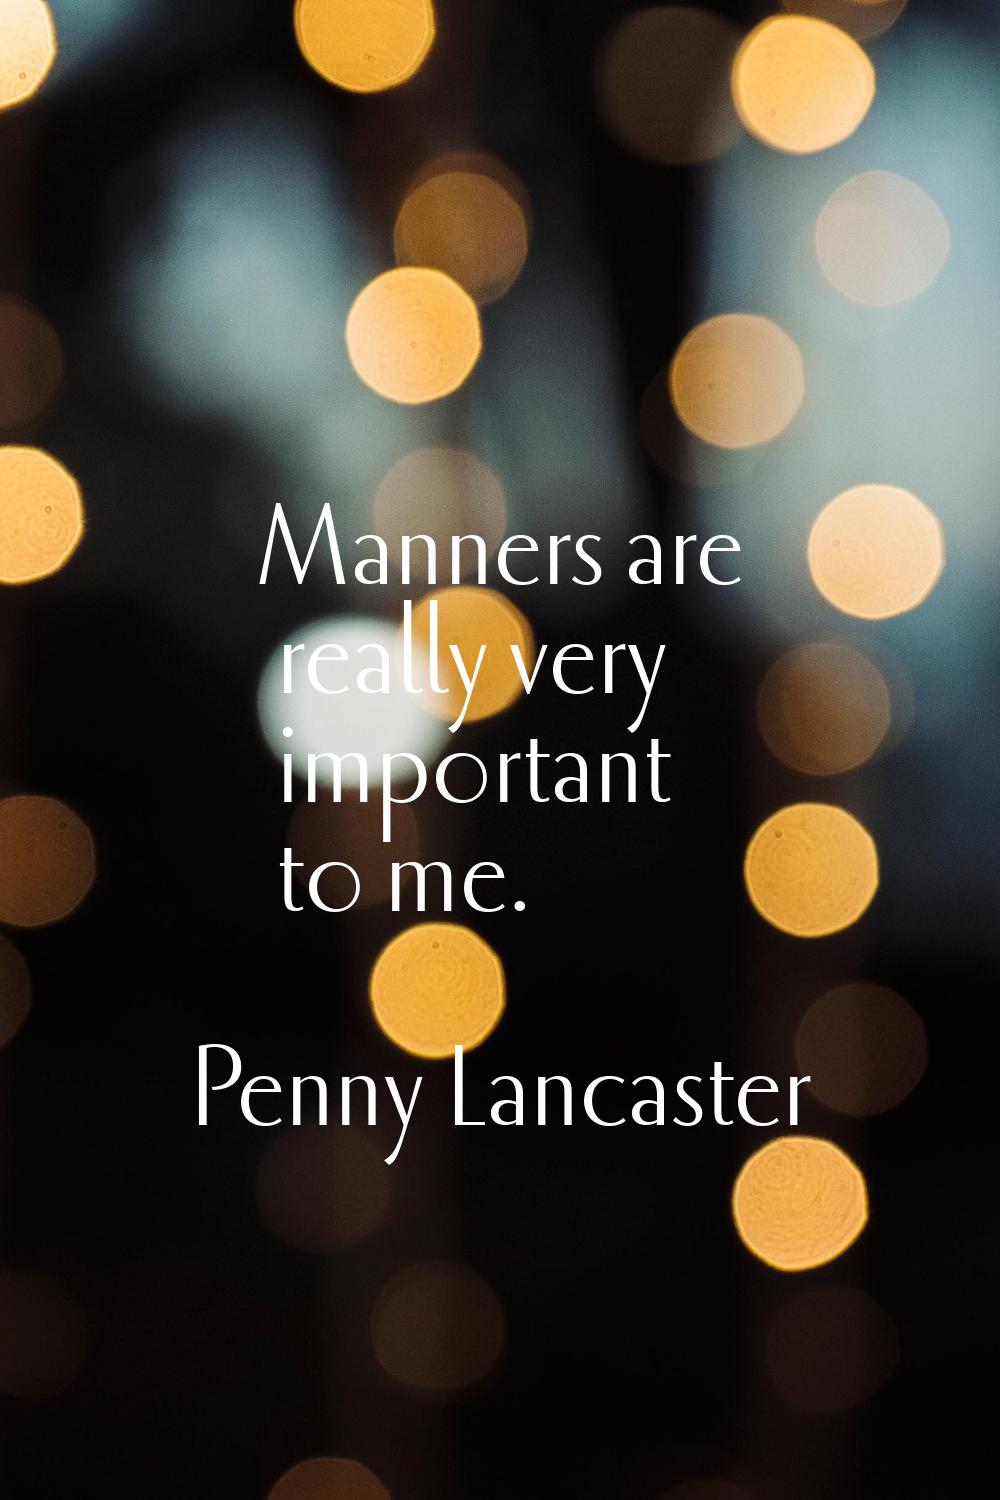 Manners are really very important to me.